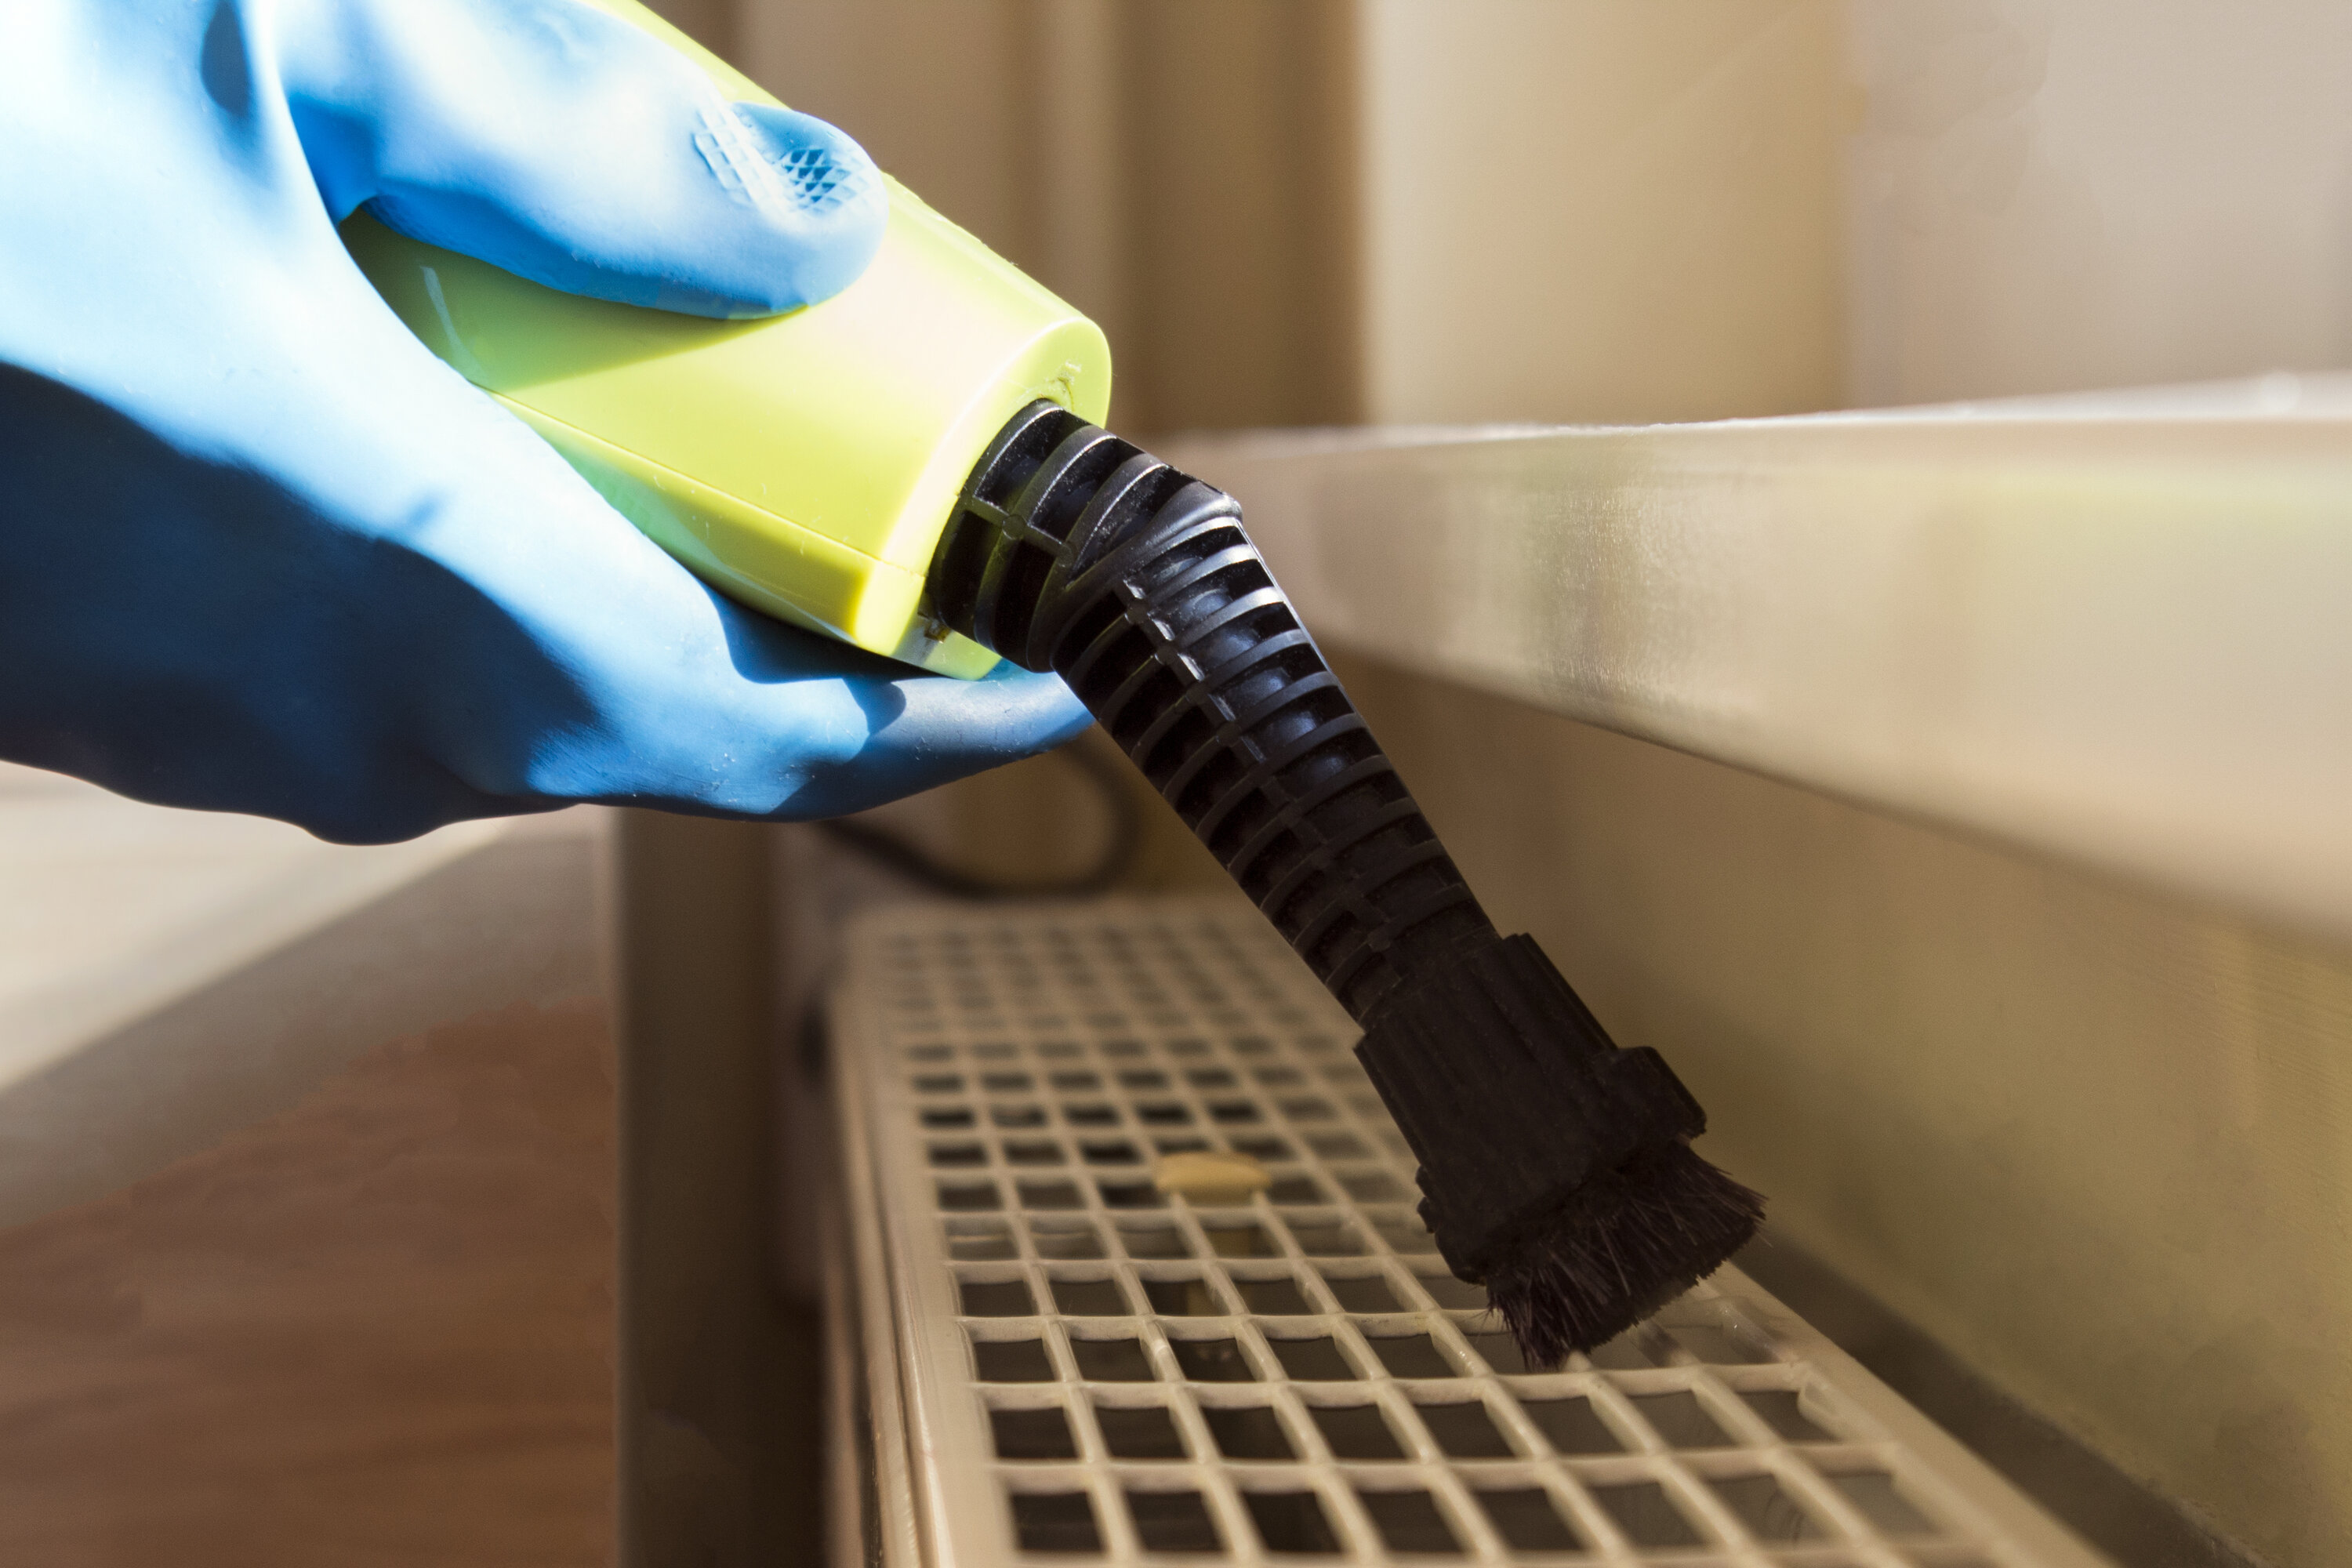 A person with a blue protective glove holding a yellow and black fumigation device spraying it into a radiator 